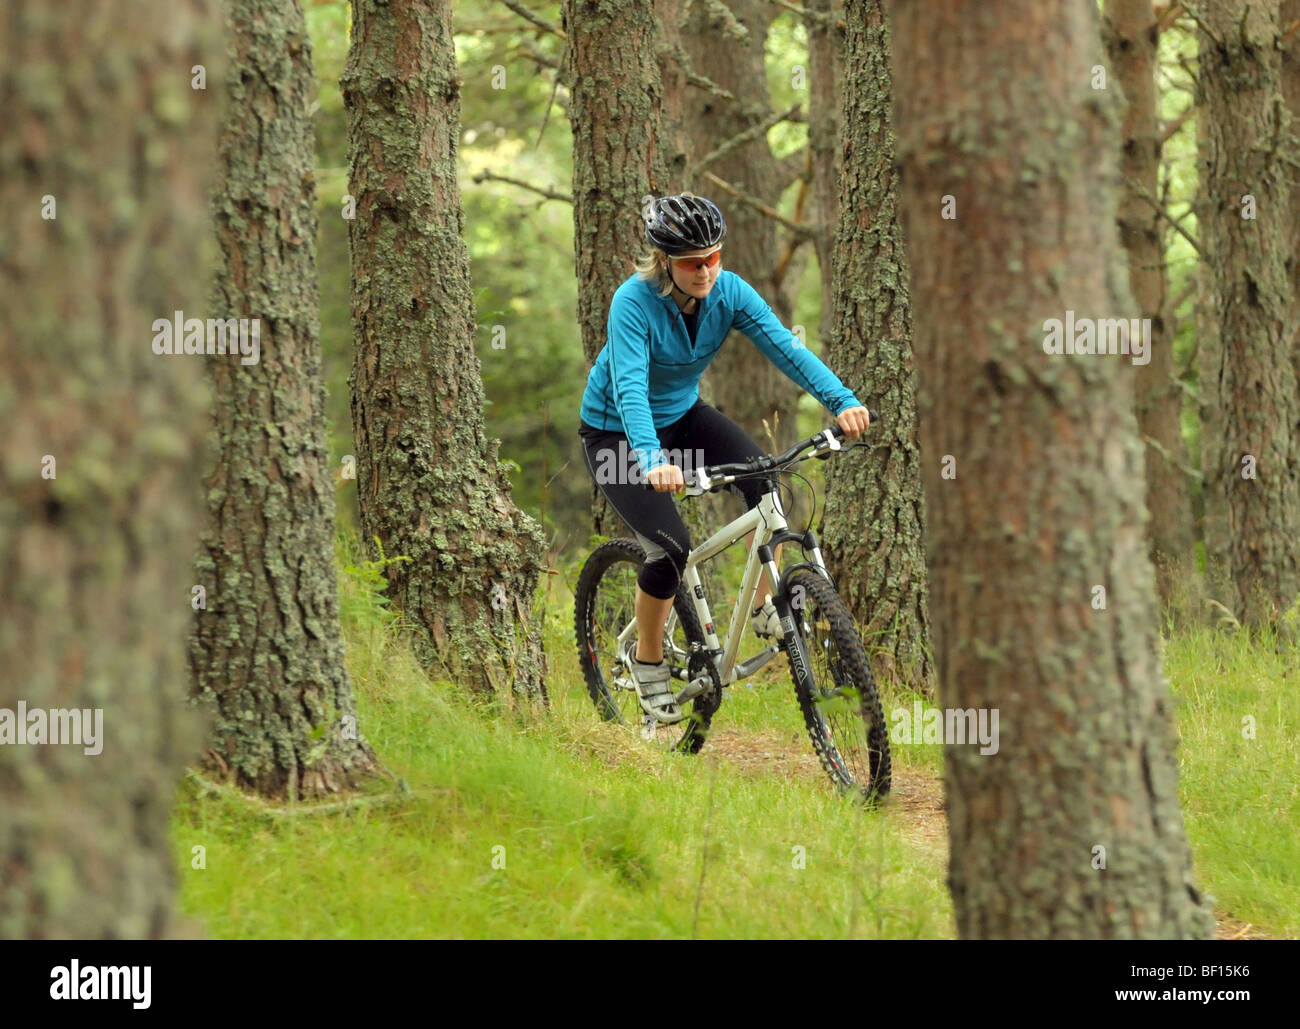 Friends cycling on a purpose built cross country mountain bike course Stock Photo